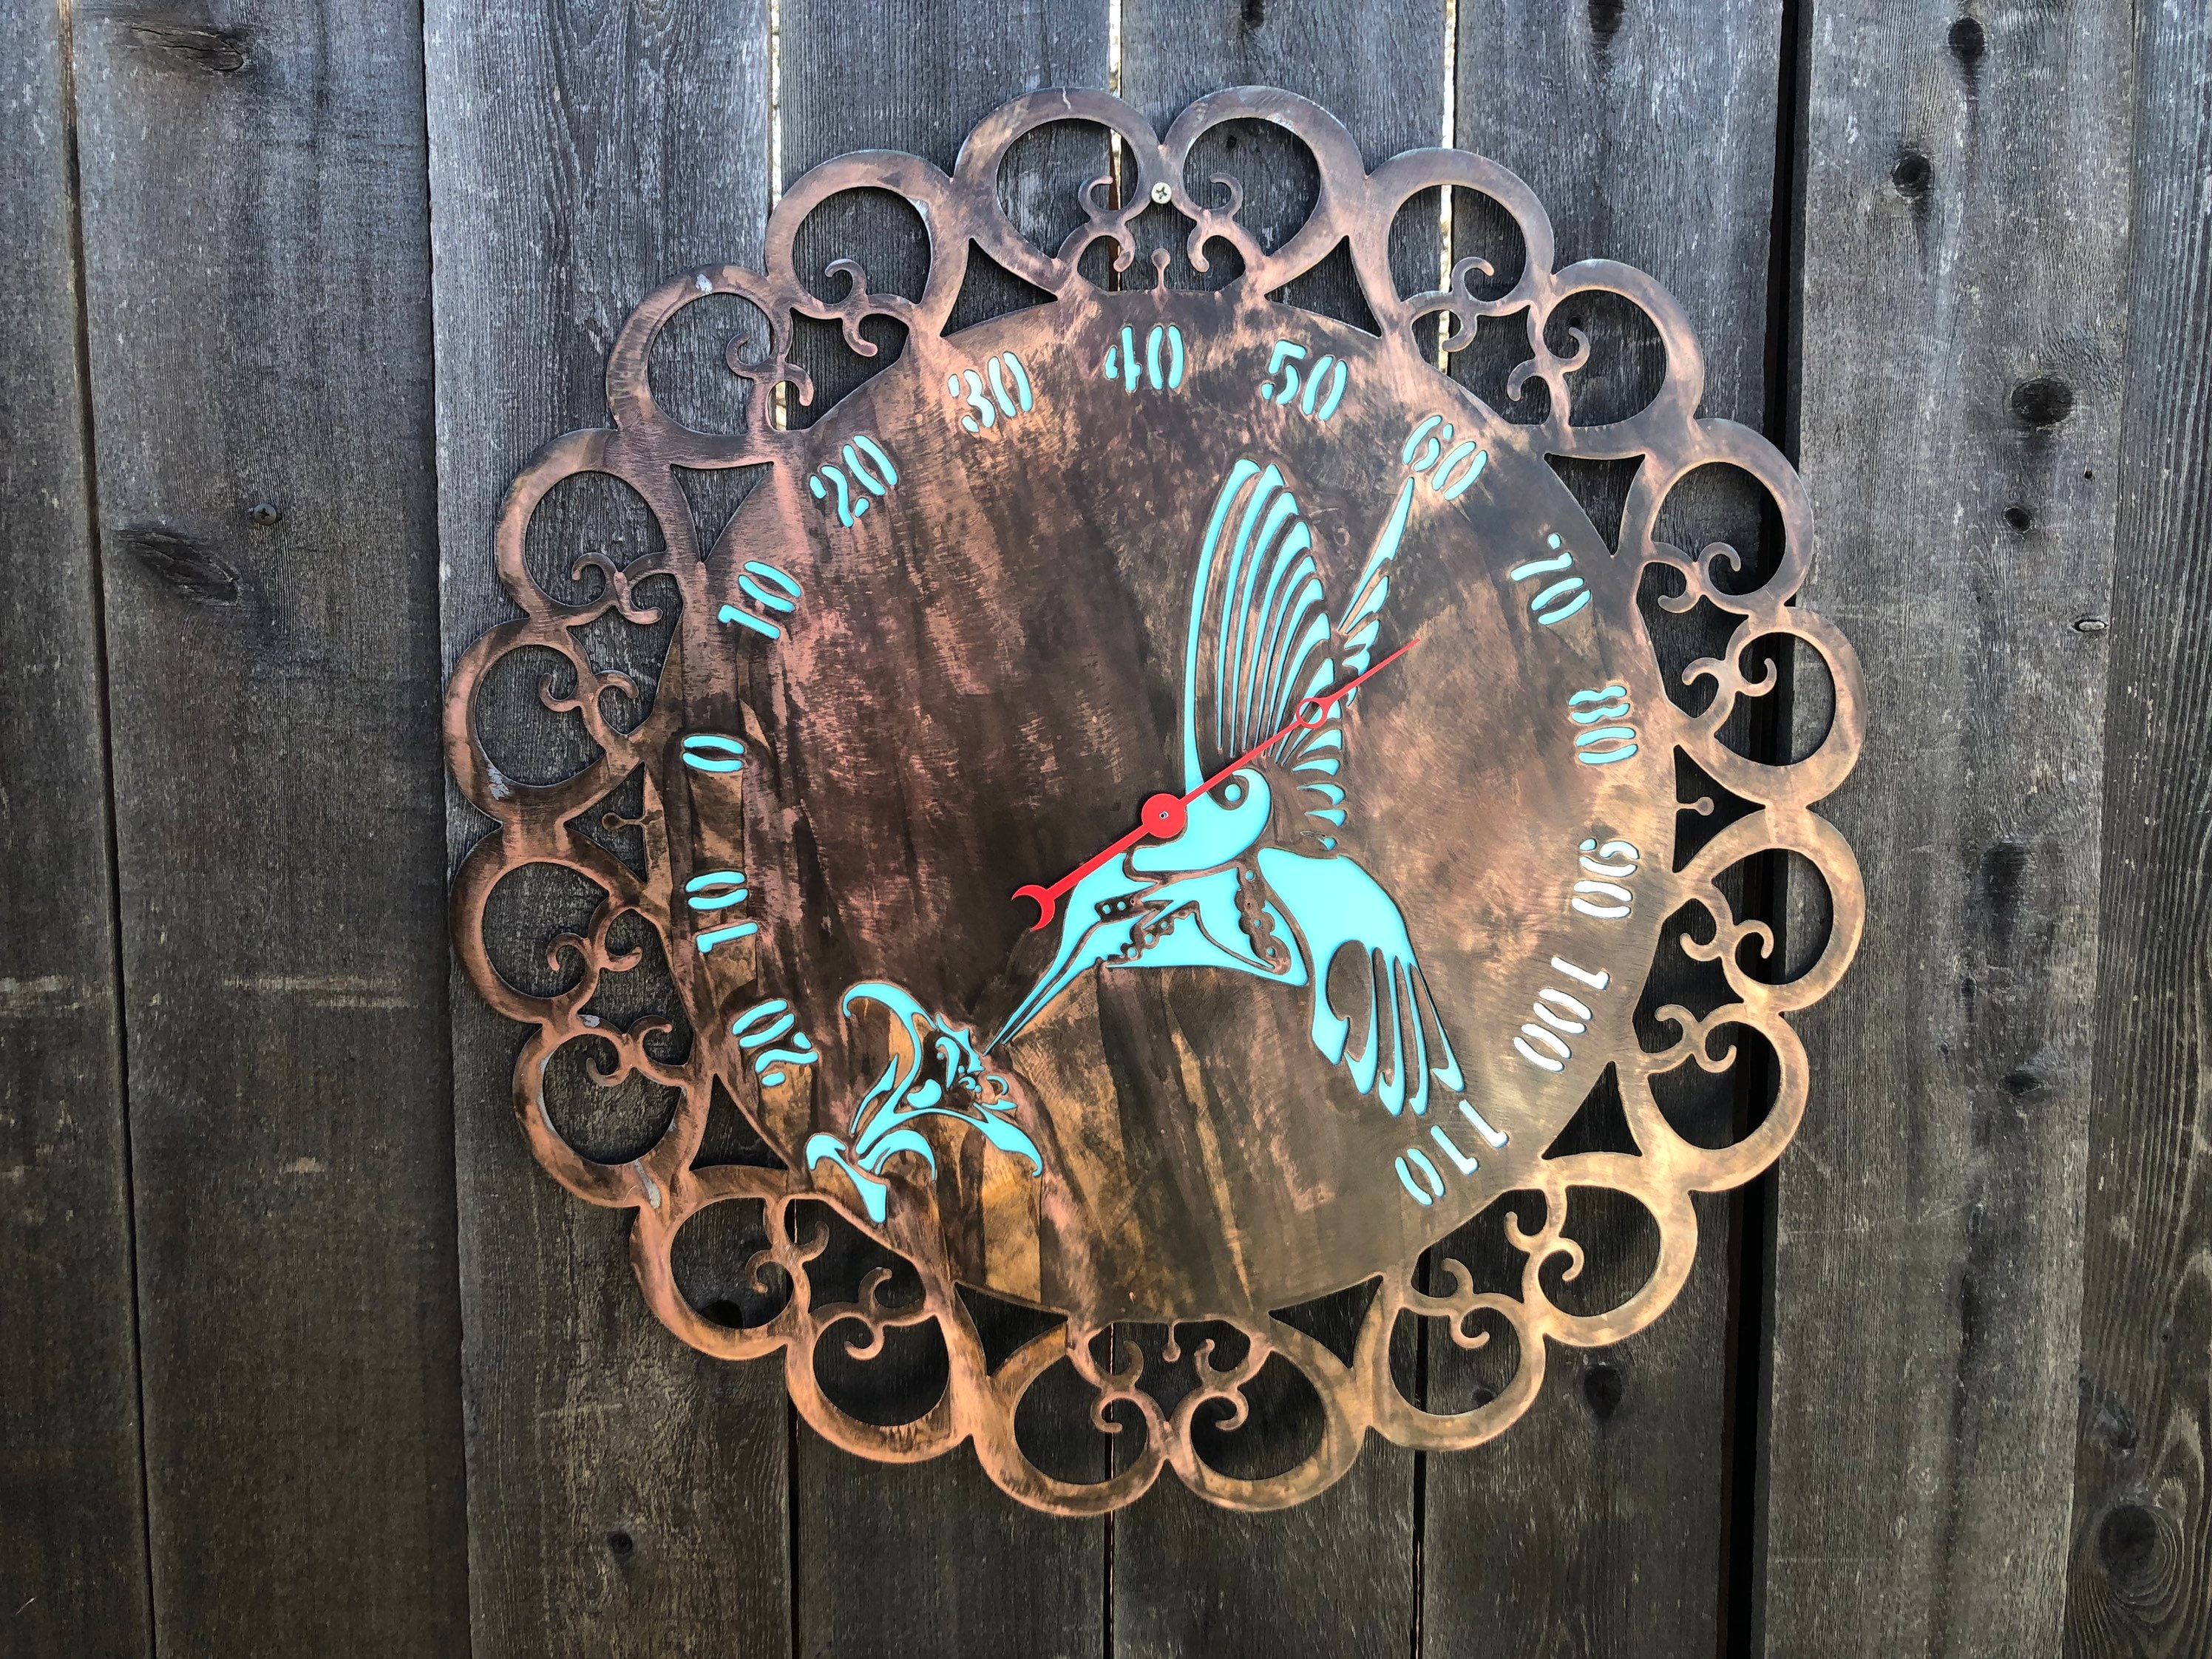 Hummingbird Outdoor Wall Thermometer